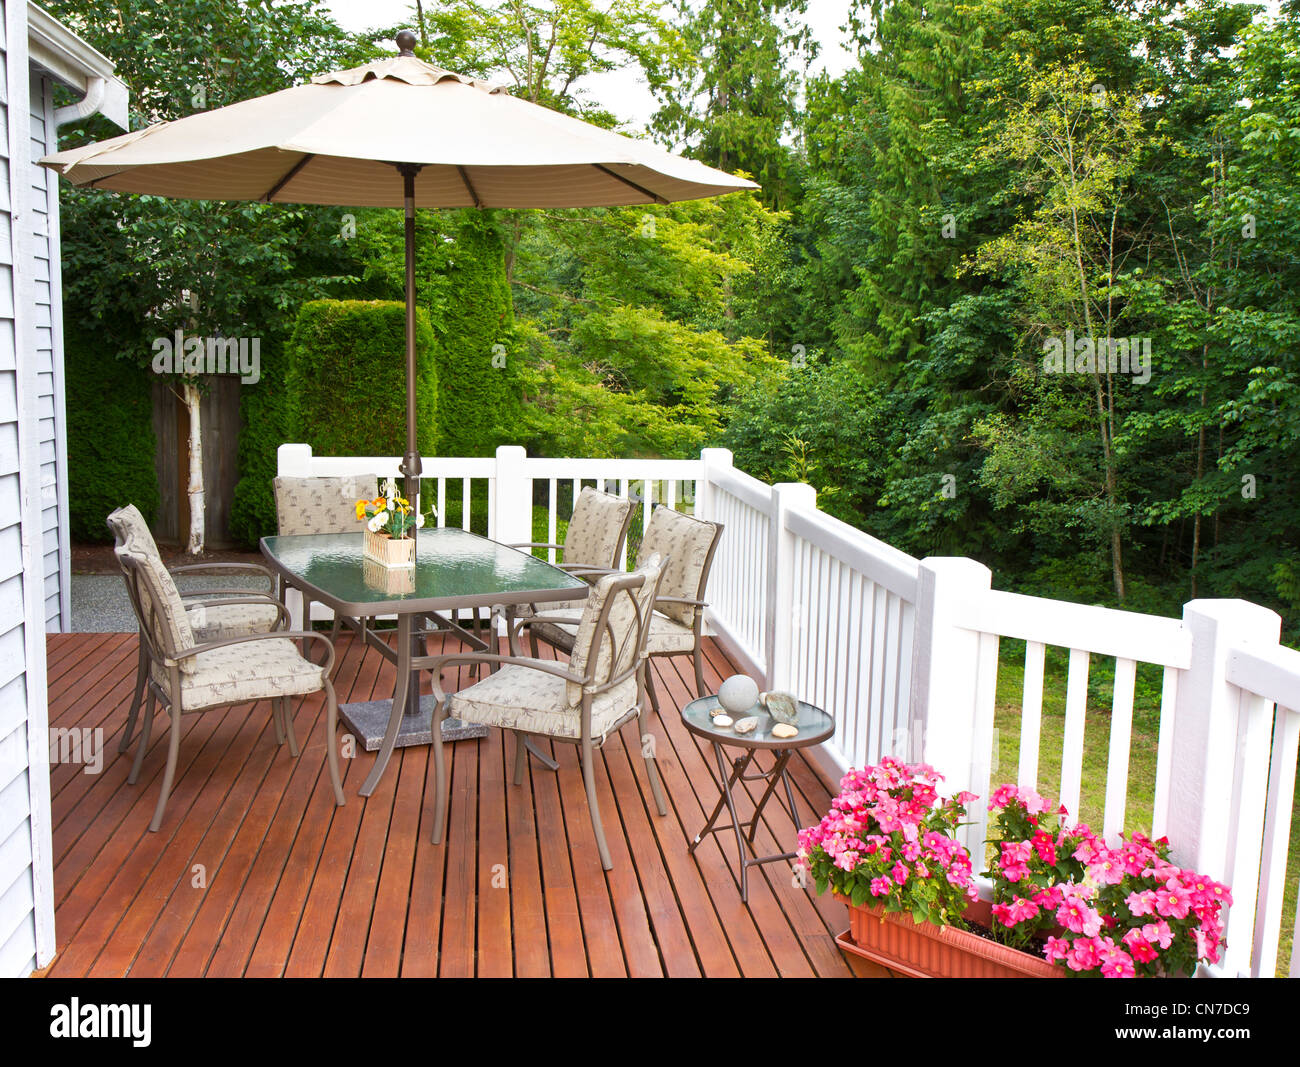 Outdoor patio built with cedar wood decking materials with trees in background Stock Photo